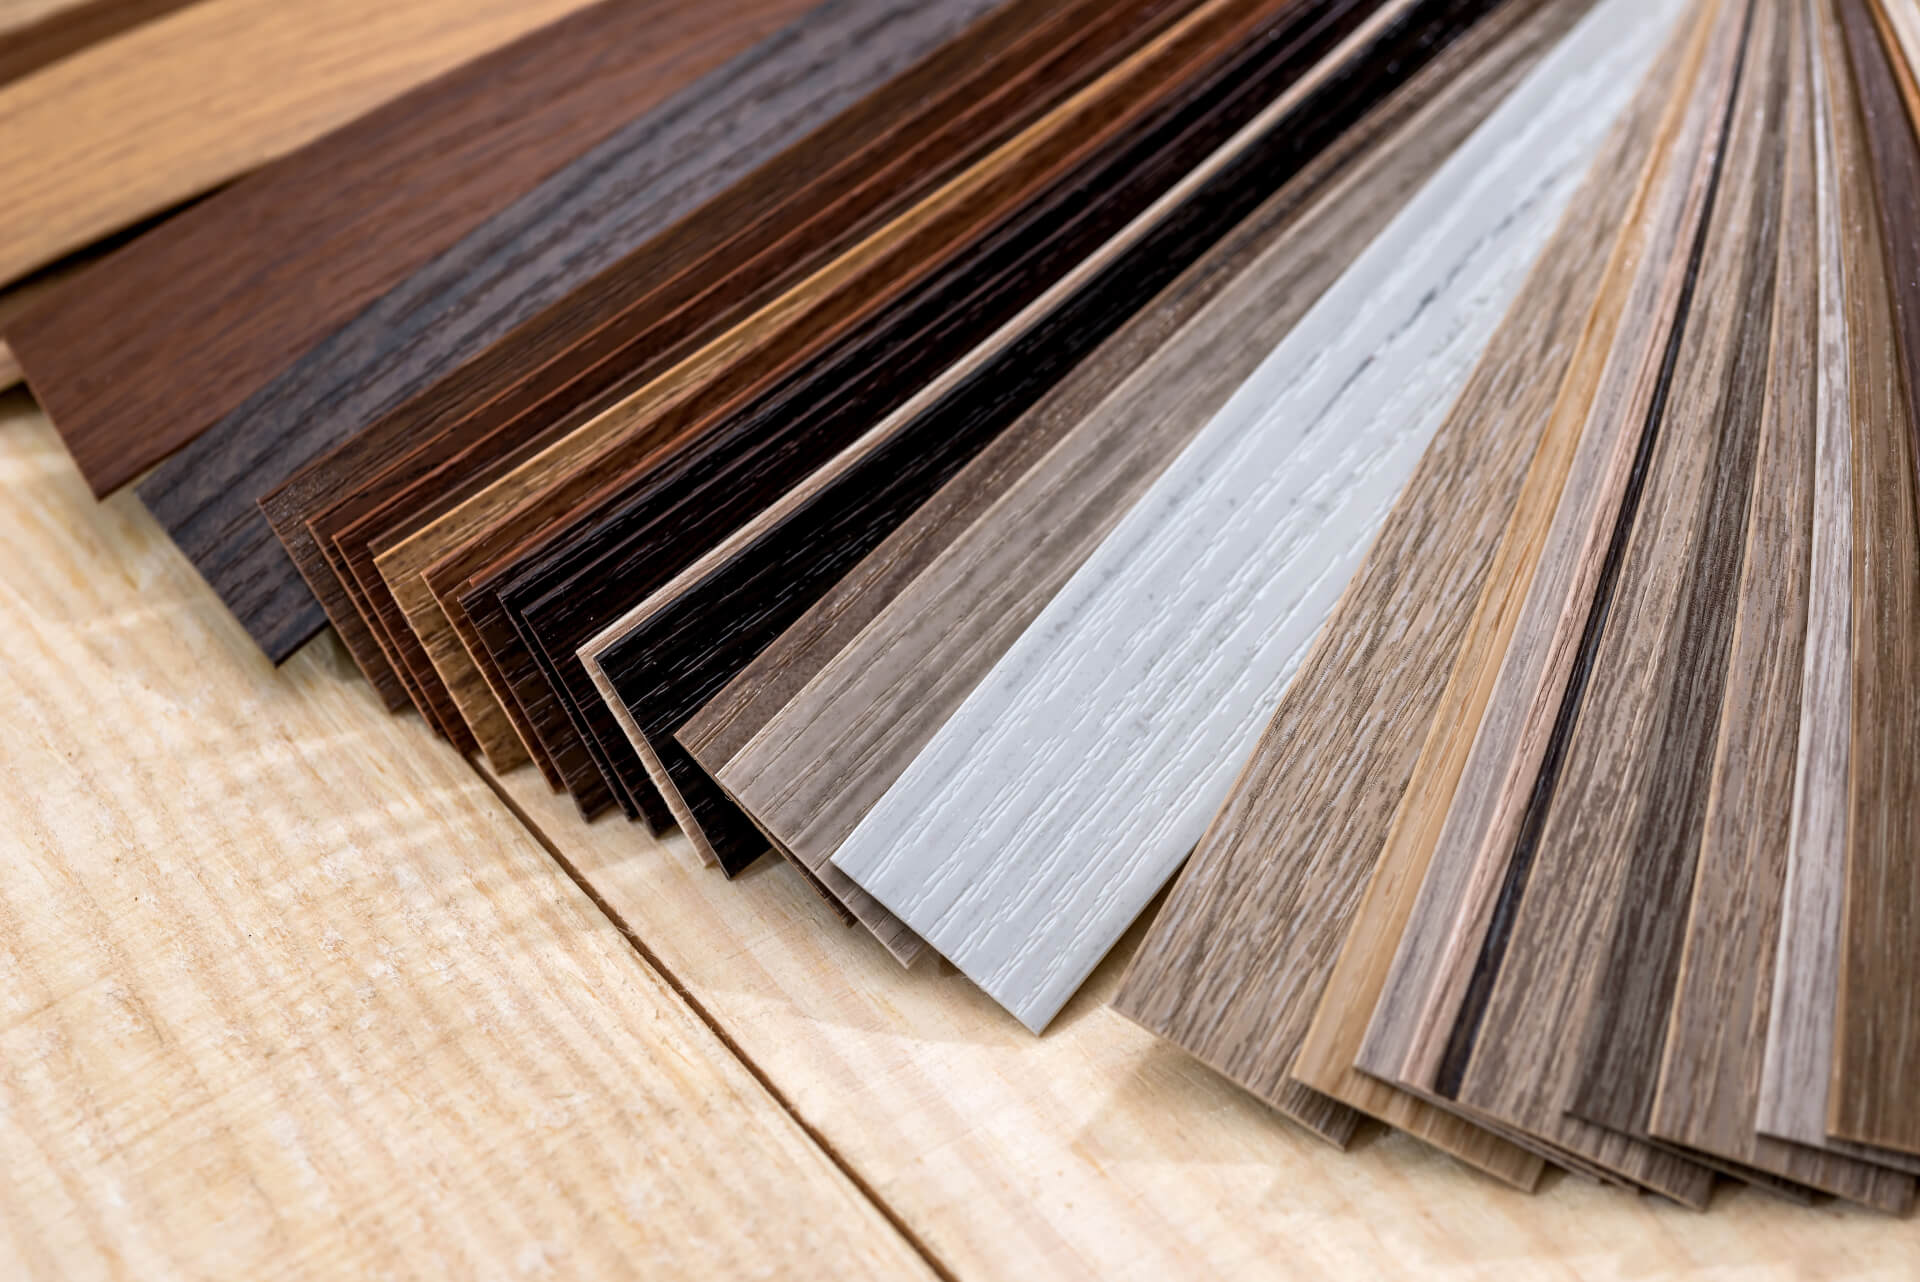 High quality wood flooring in different styles and colours from One Step Beyond Flooring Products